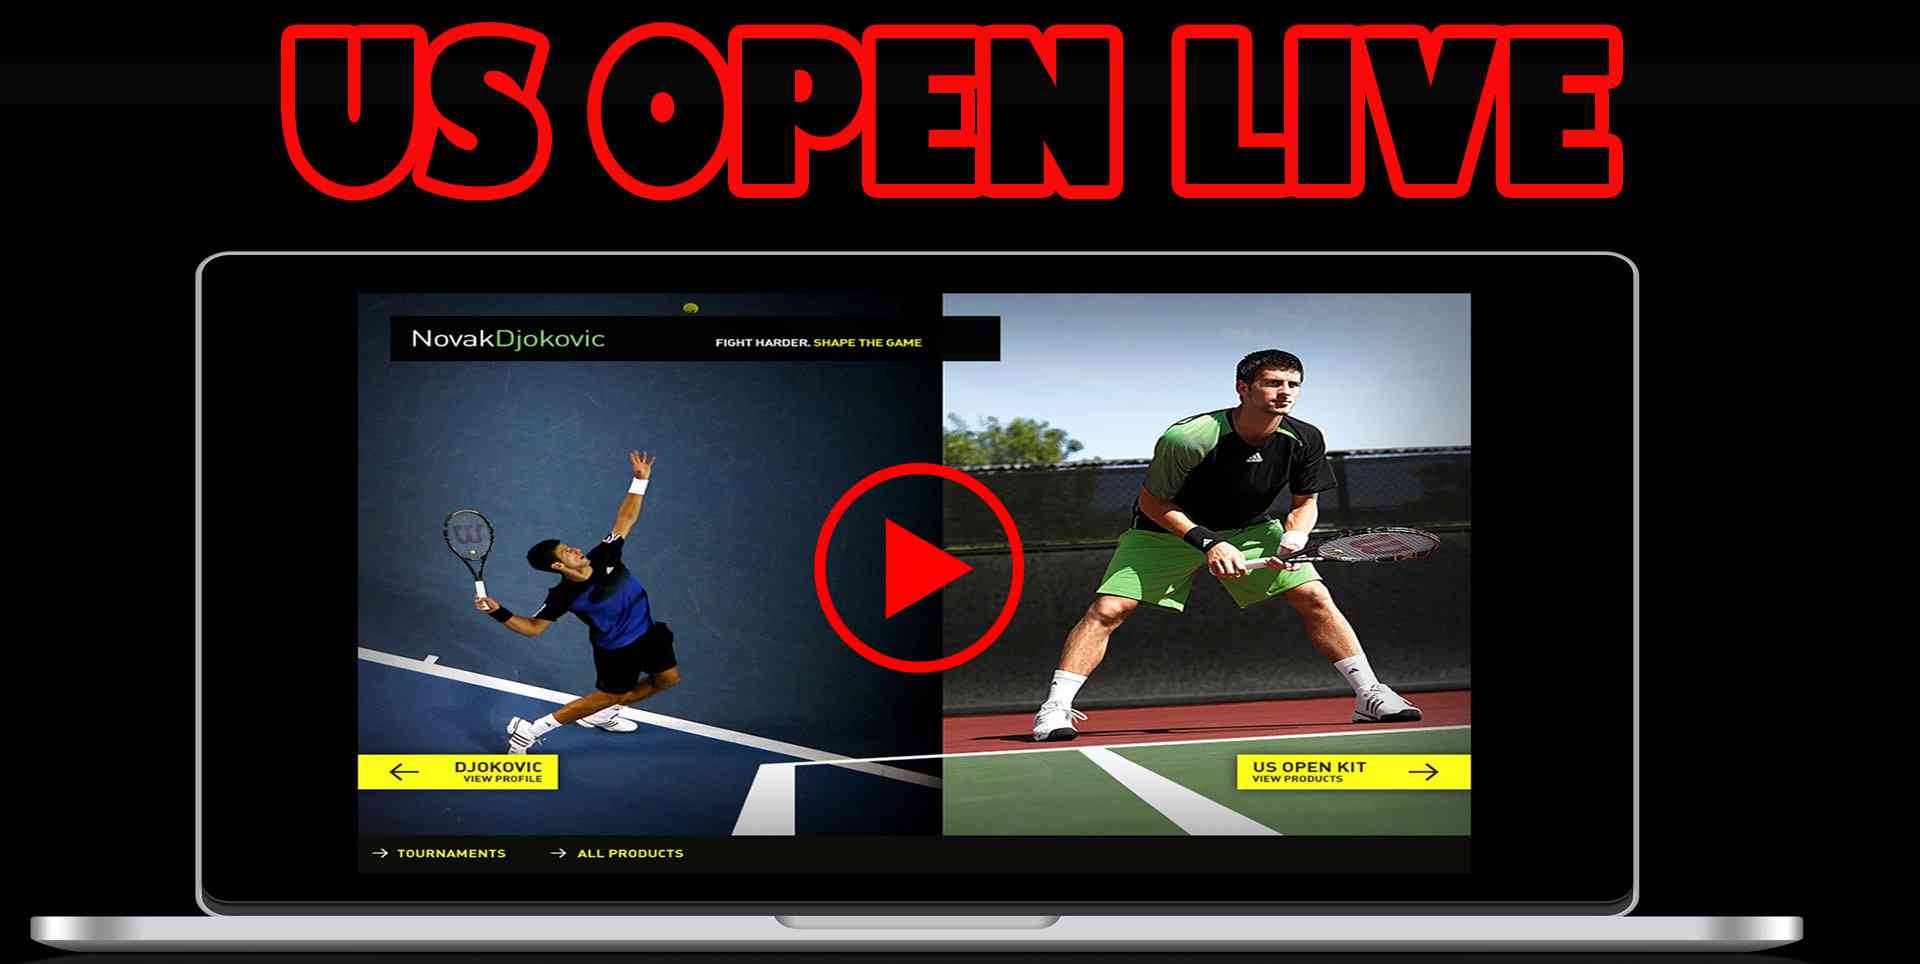 men-singles-3rd-round-2018-us-open-streaming